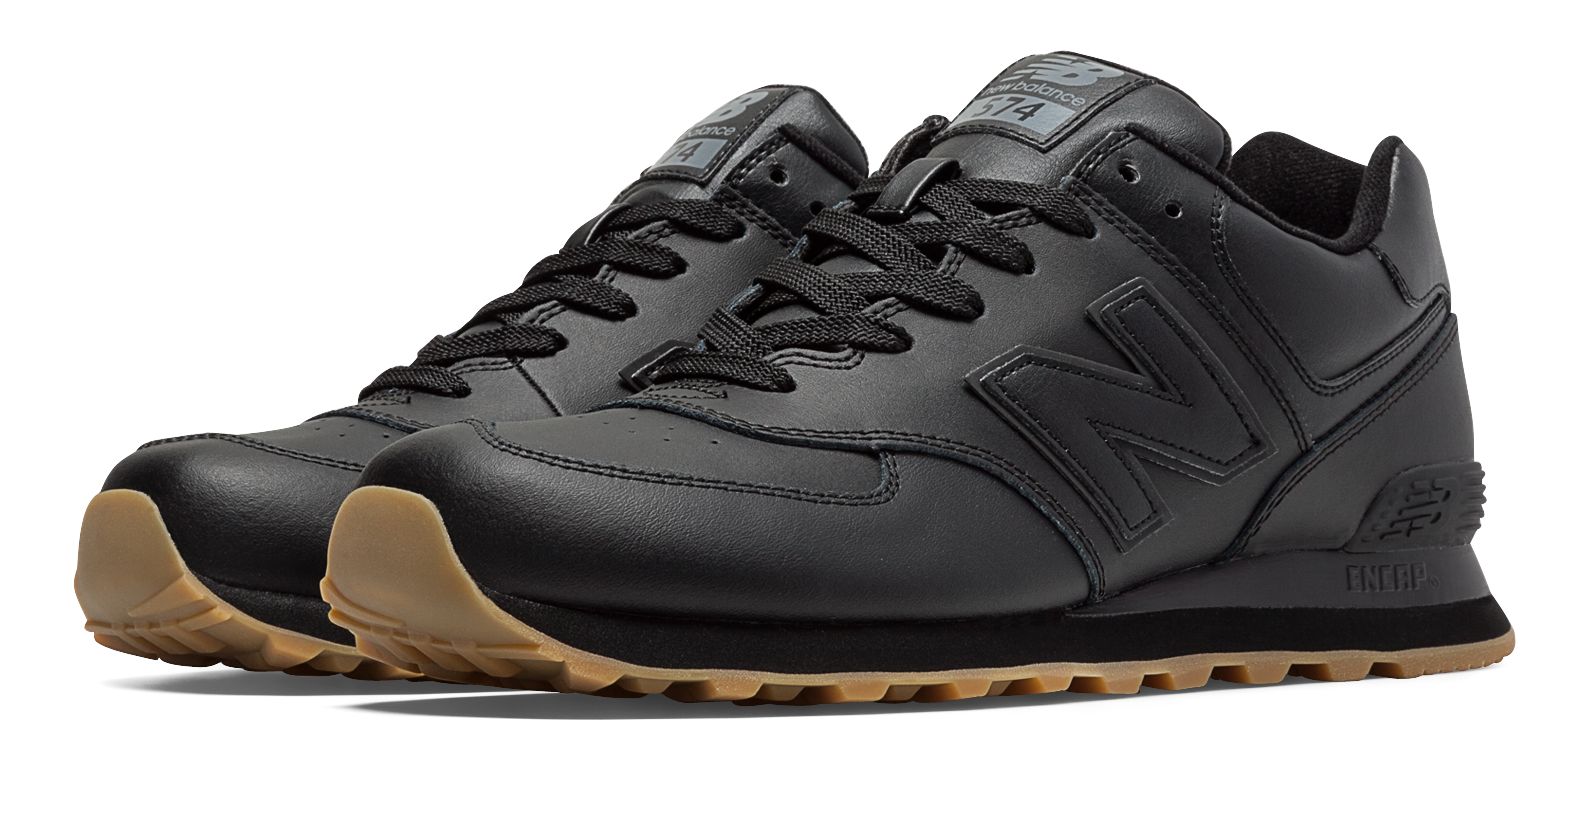 Men's New Balance 574 Shoes - New Colors and Styles